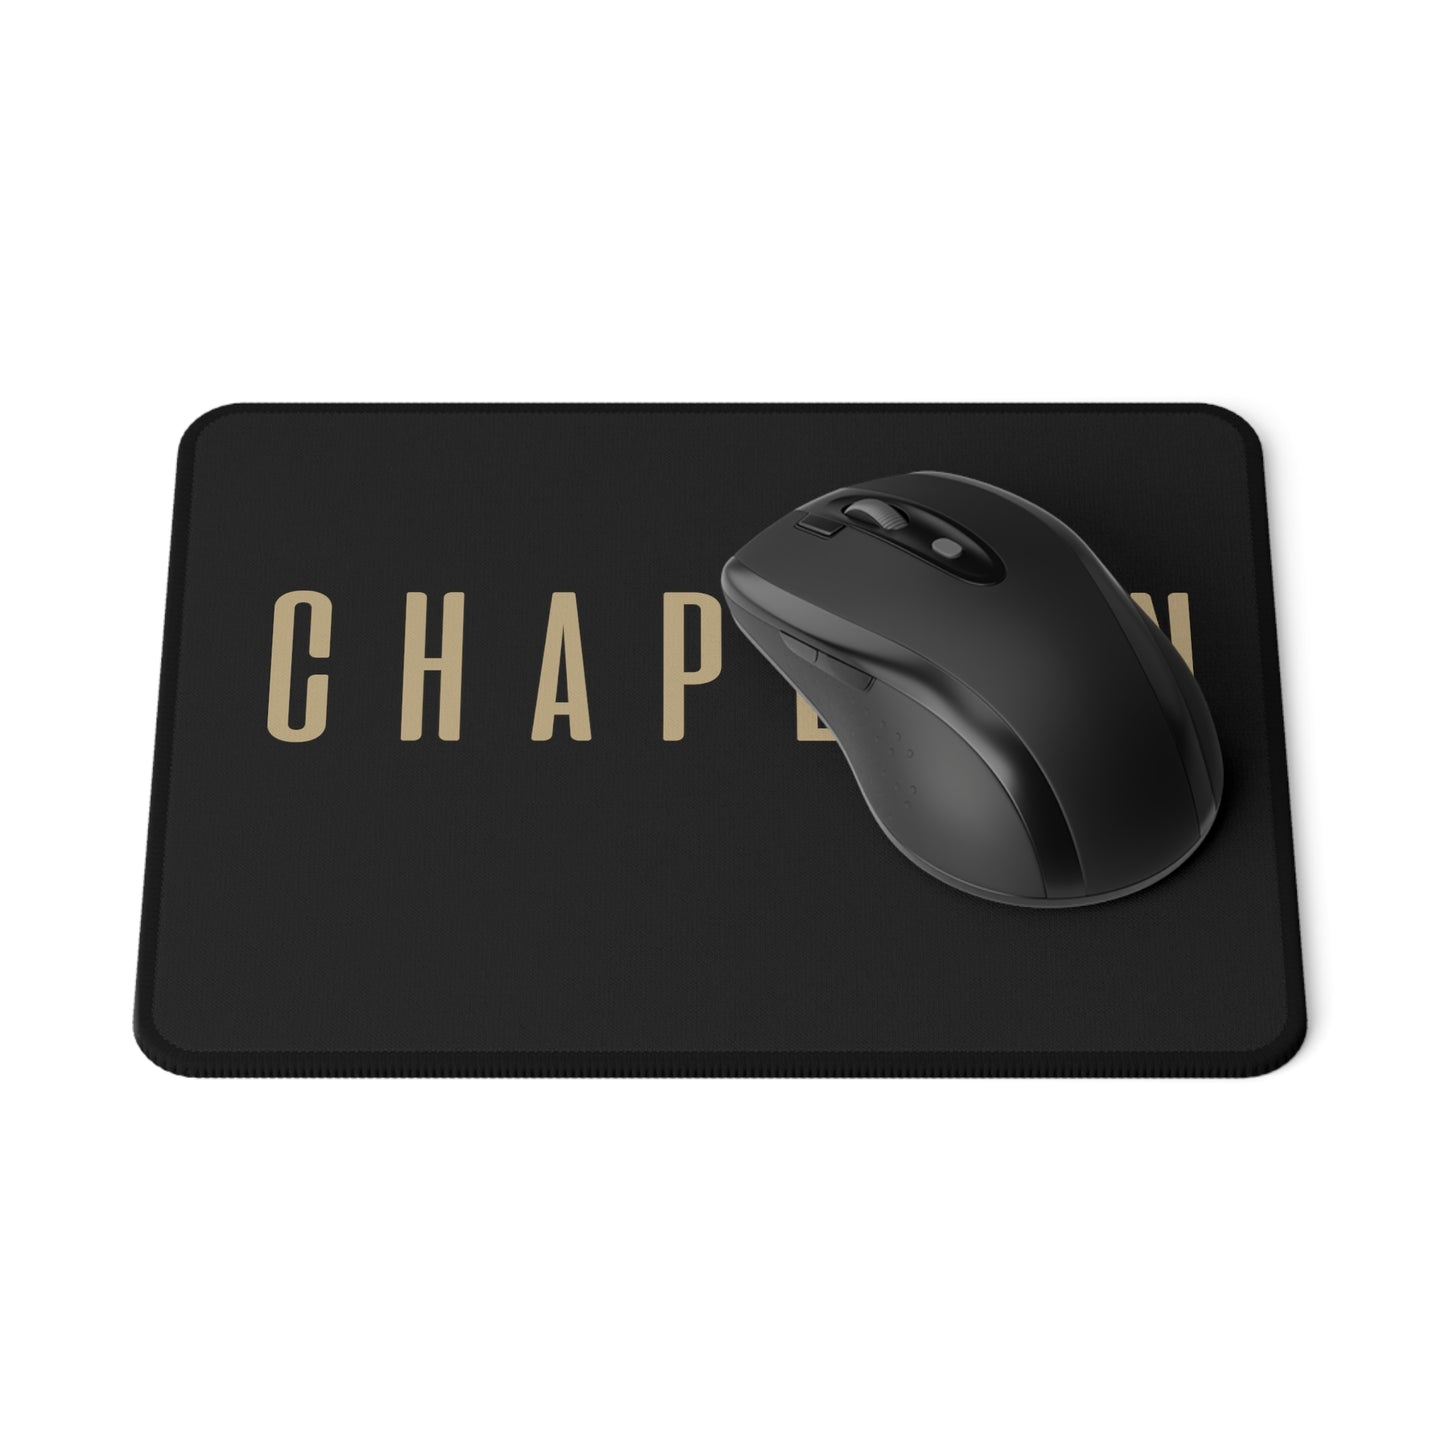 Non-Slip Mouse Pads, Chaplain Gifts by Chaplain Life®